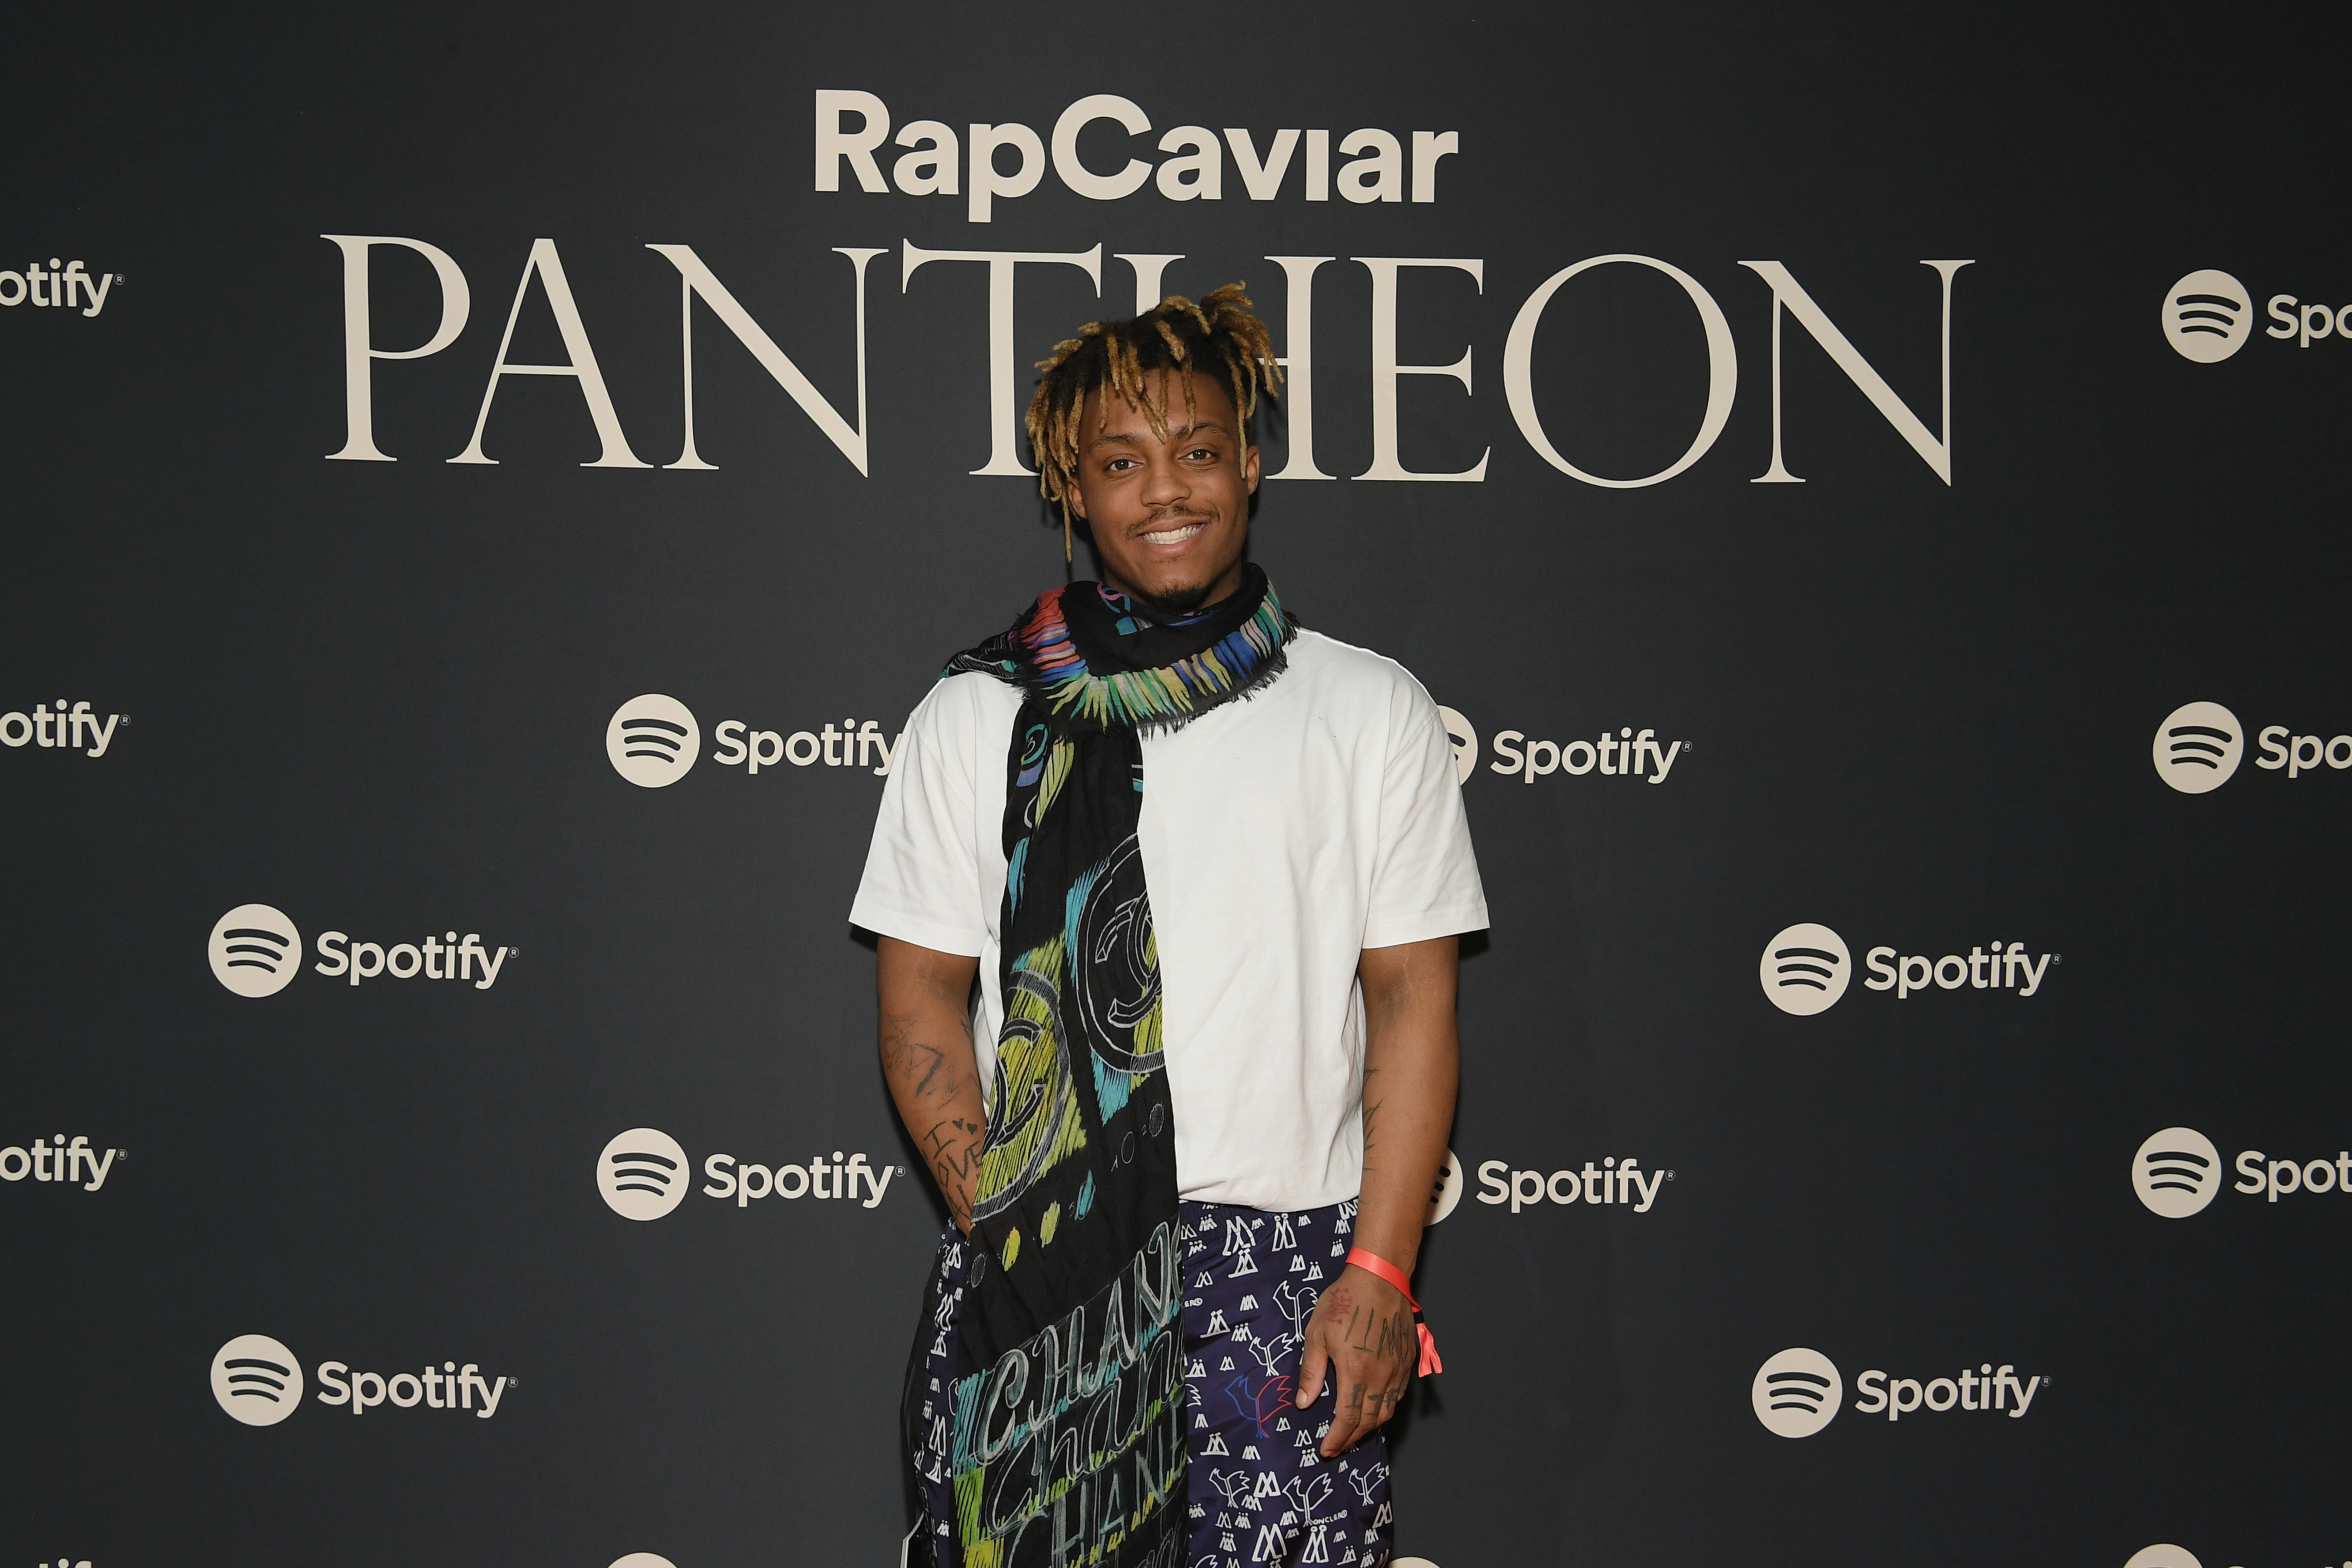 Juice WRLD attends Spotify's RapCaviar Pantheon at Brooklyn Museum on April 02, 2019 in Brooklyn, New York. (Photo by Dia Dipasupil/Getty Images for Spotify)